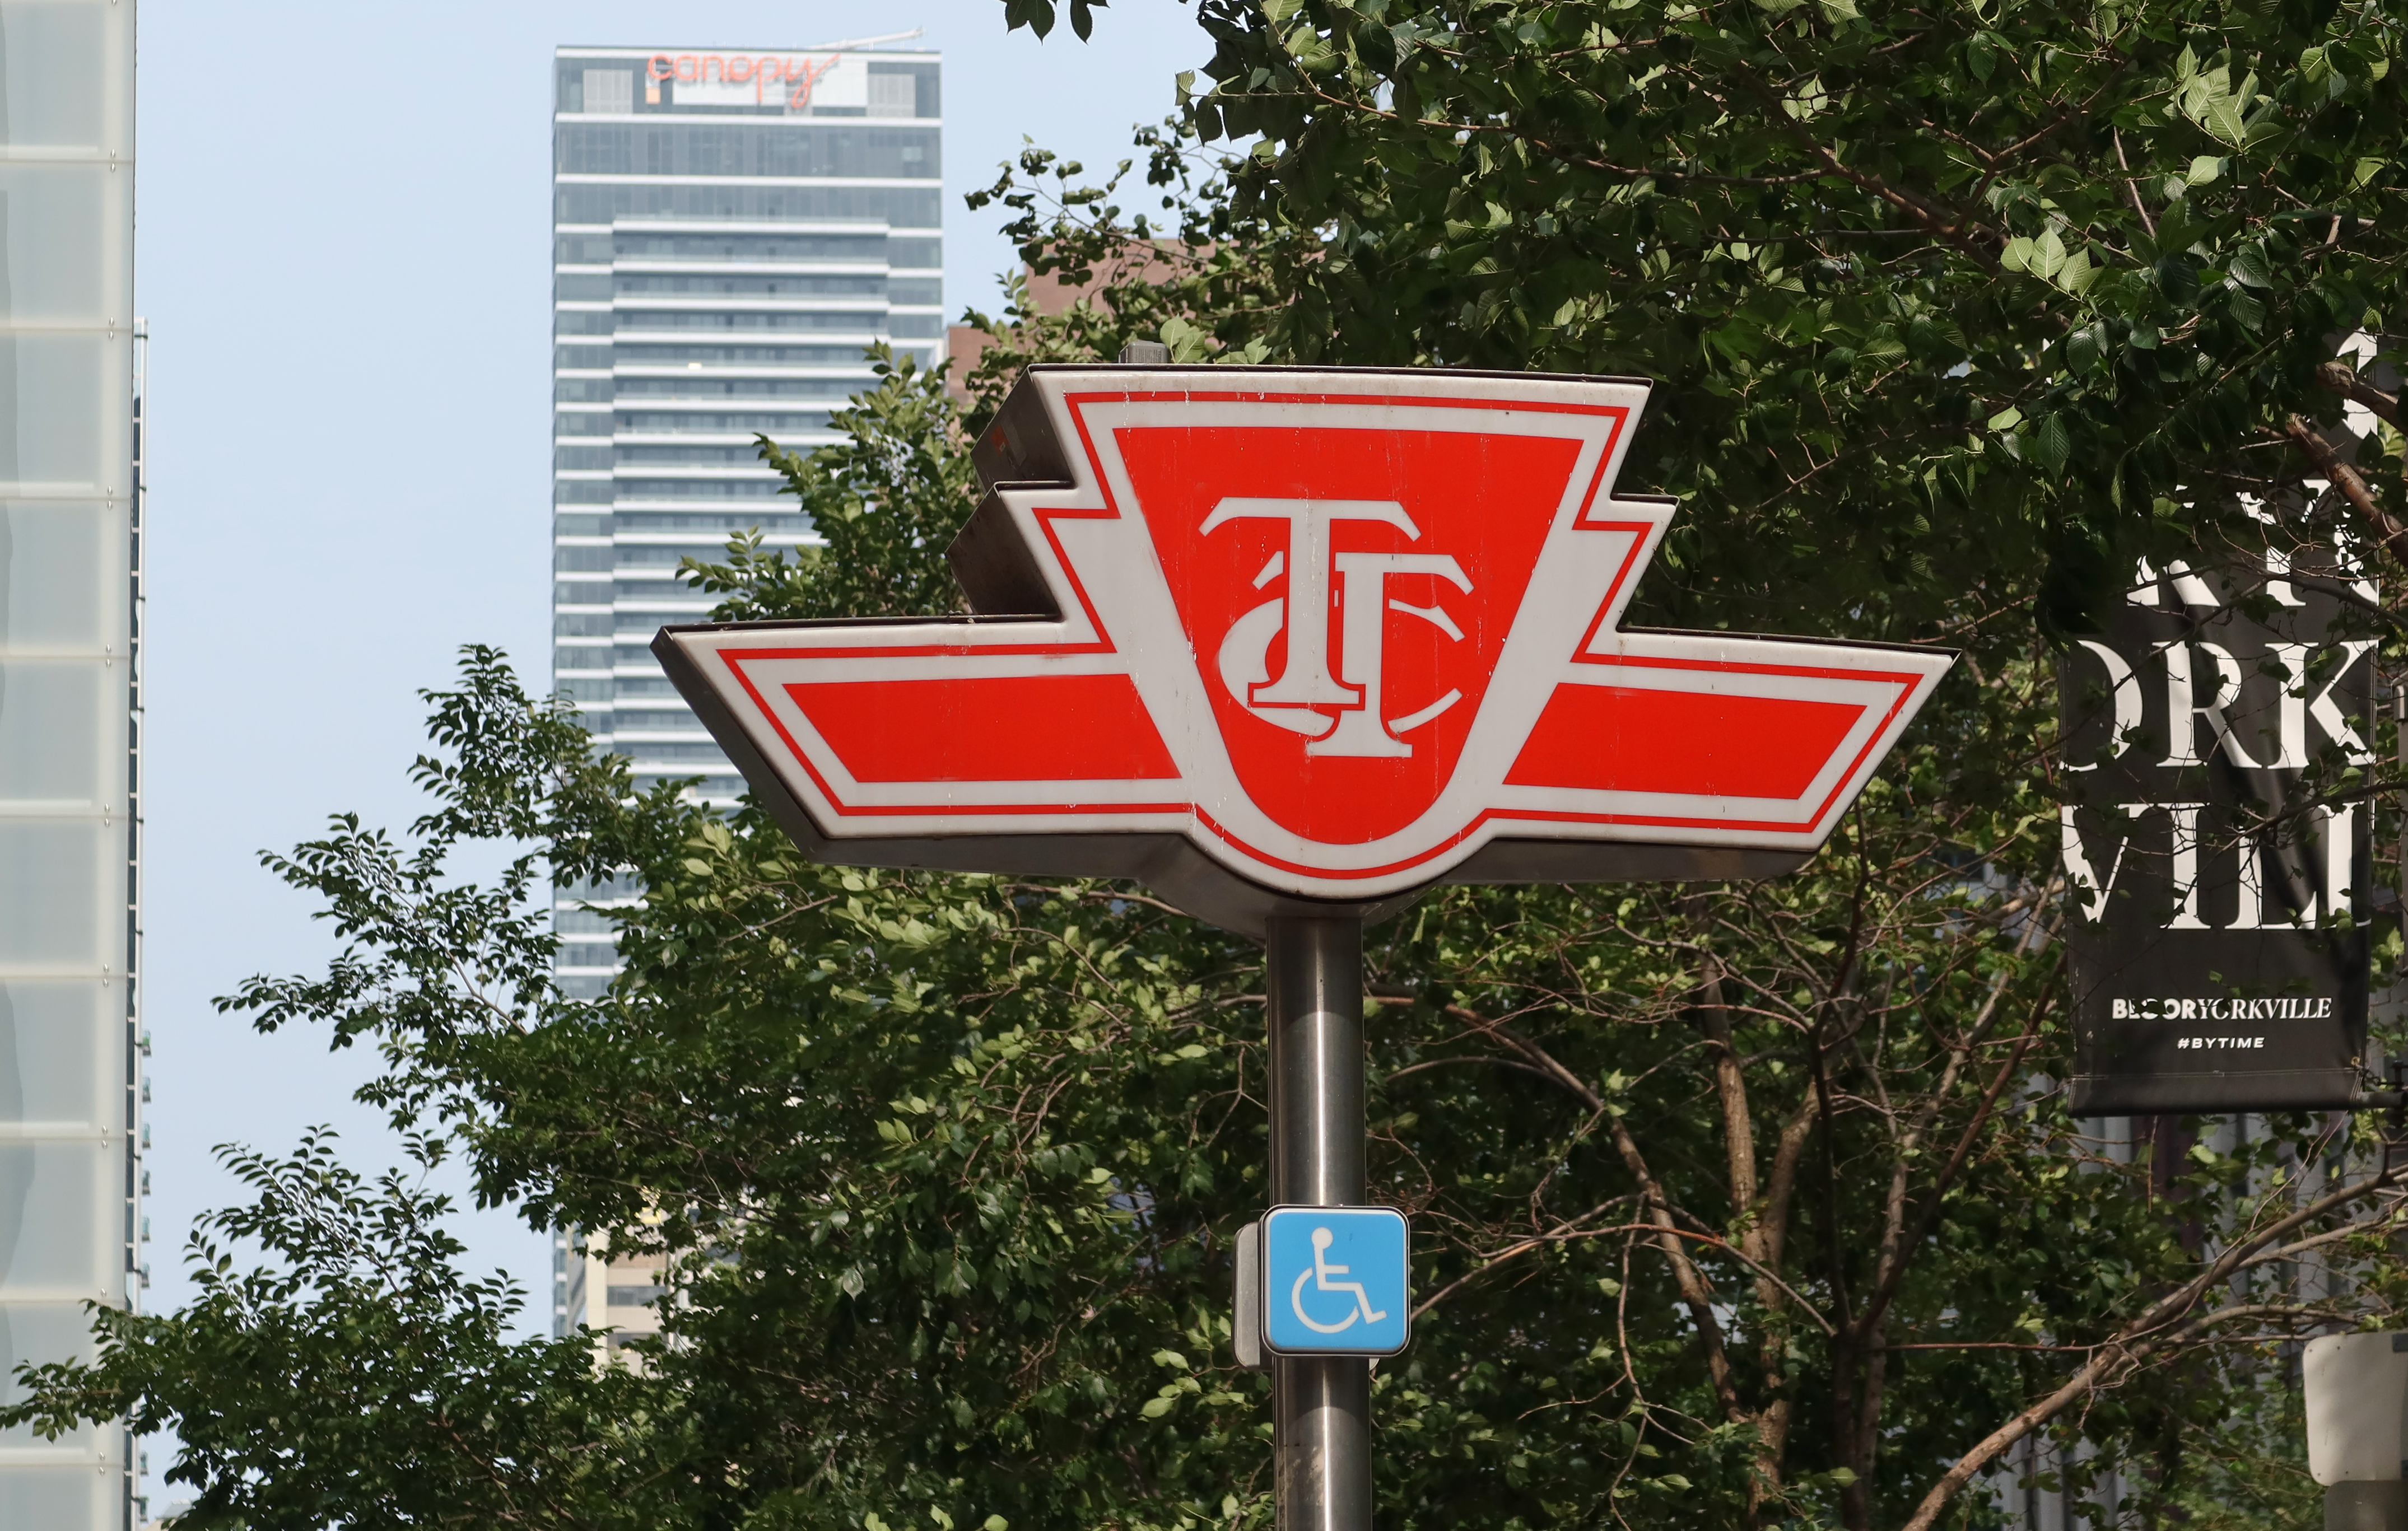 More TTC service disruptions loom as workers inch closer to strike